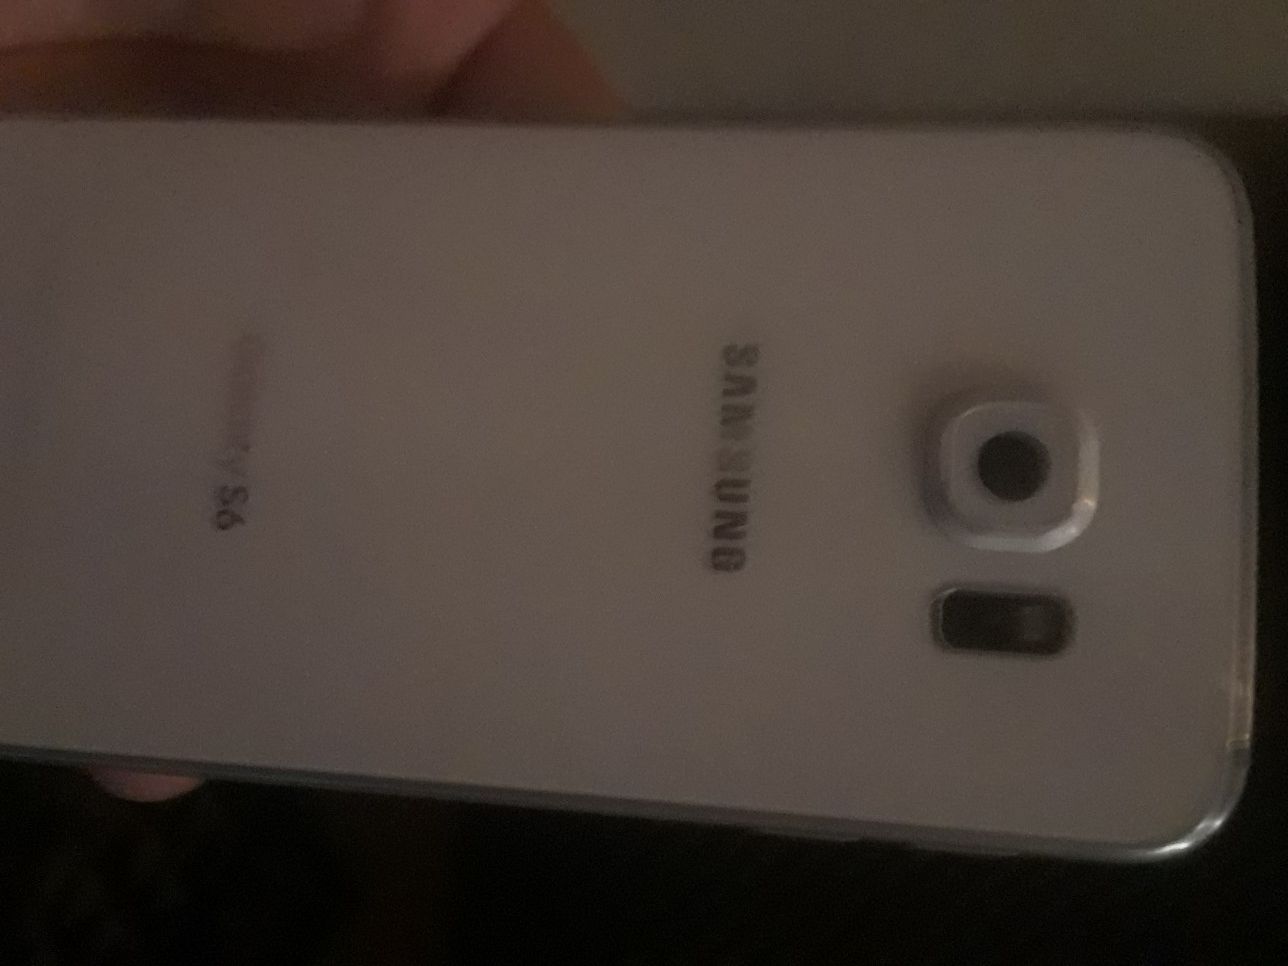 Galaxy s6 no scratches there is a blue light and screen does not come on